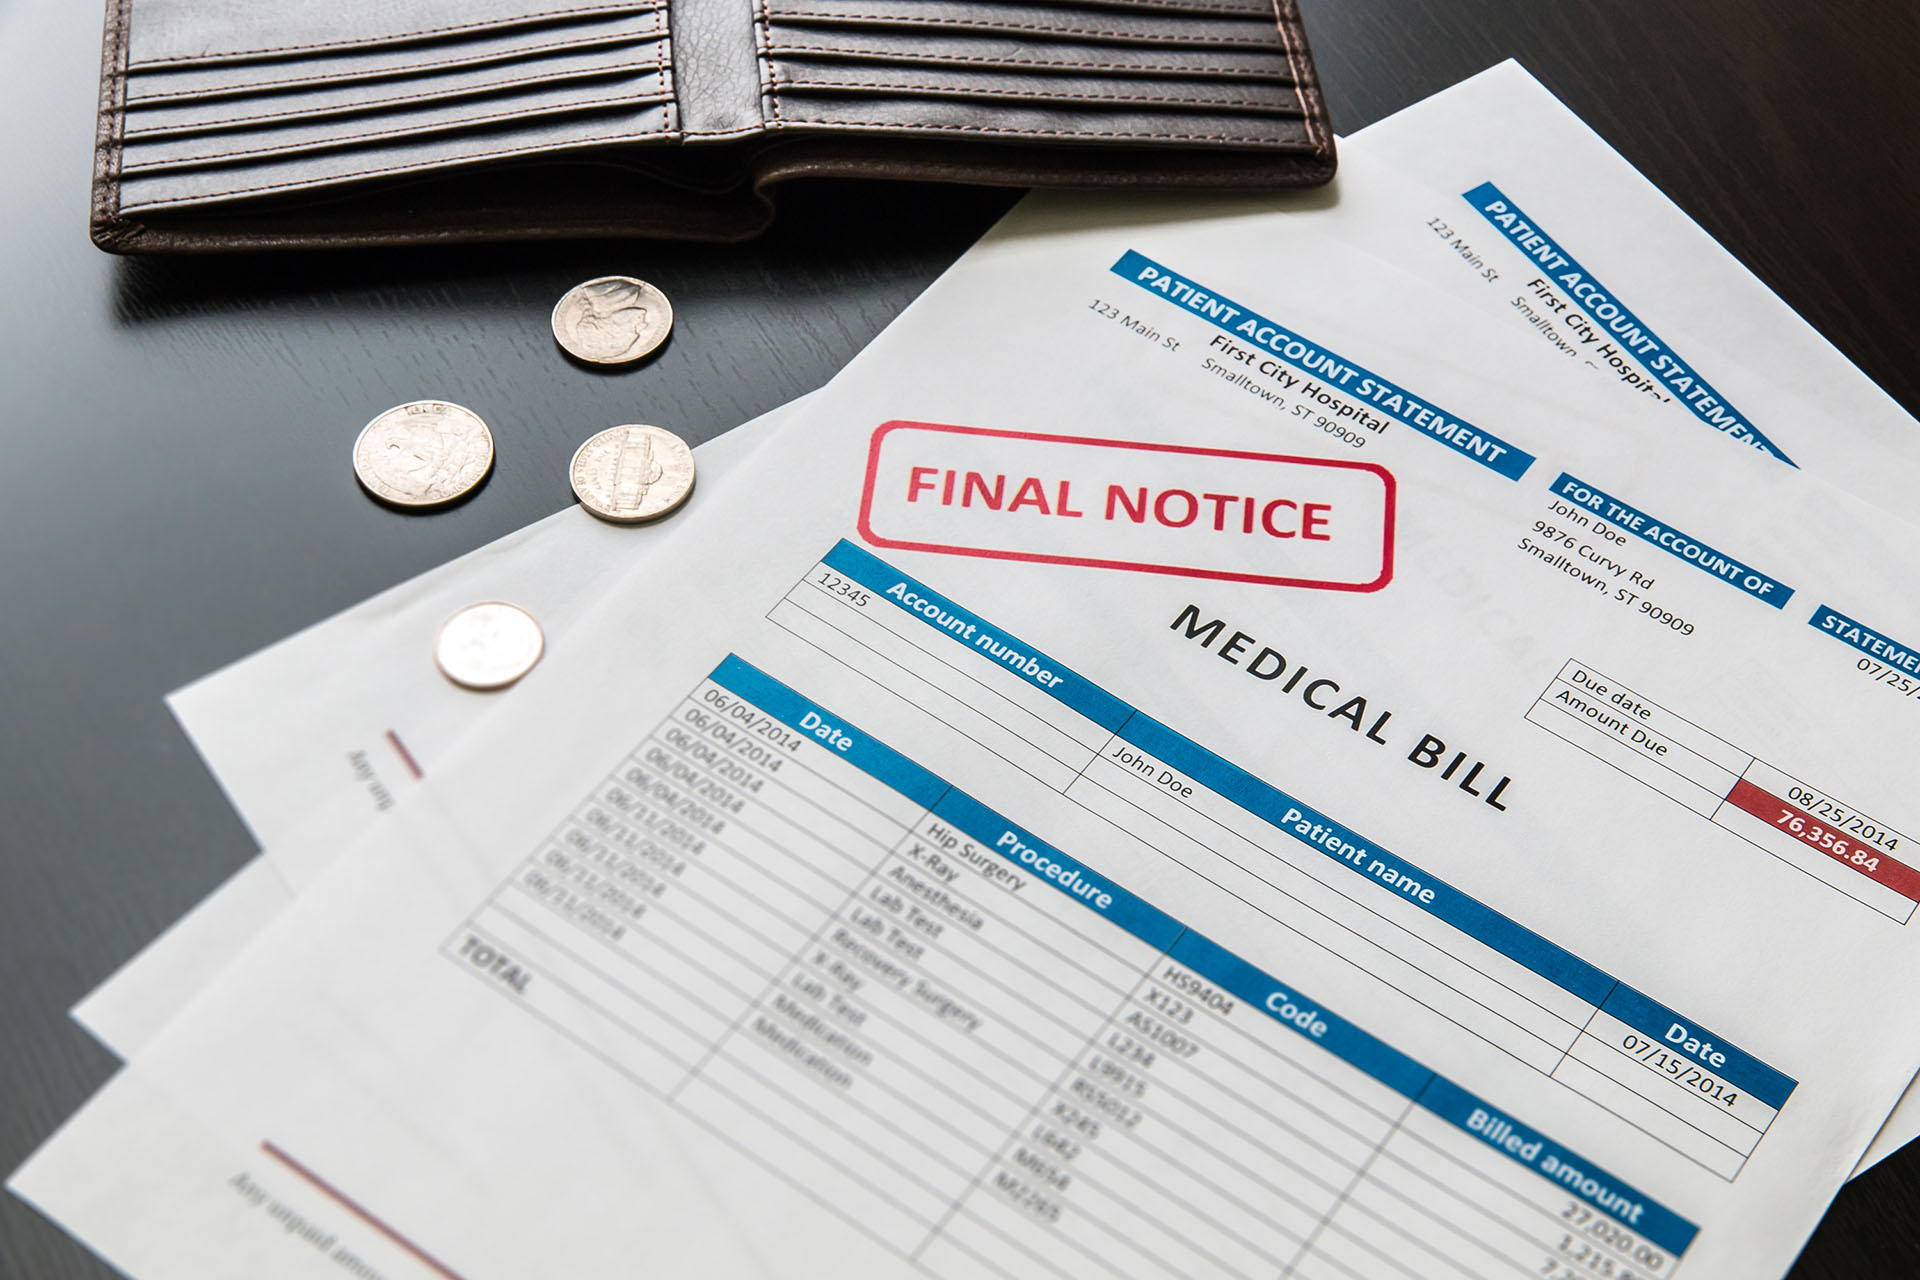 Can Medical Debt Be Discharged in Bankruptcy in Arizona?